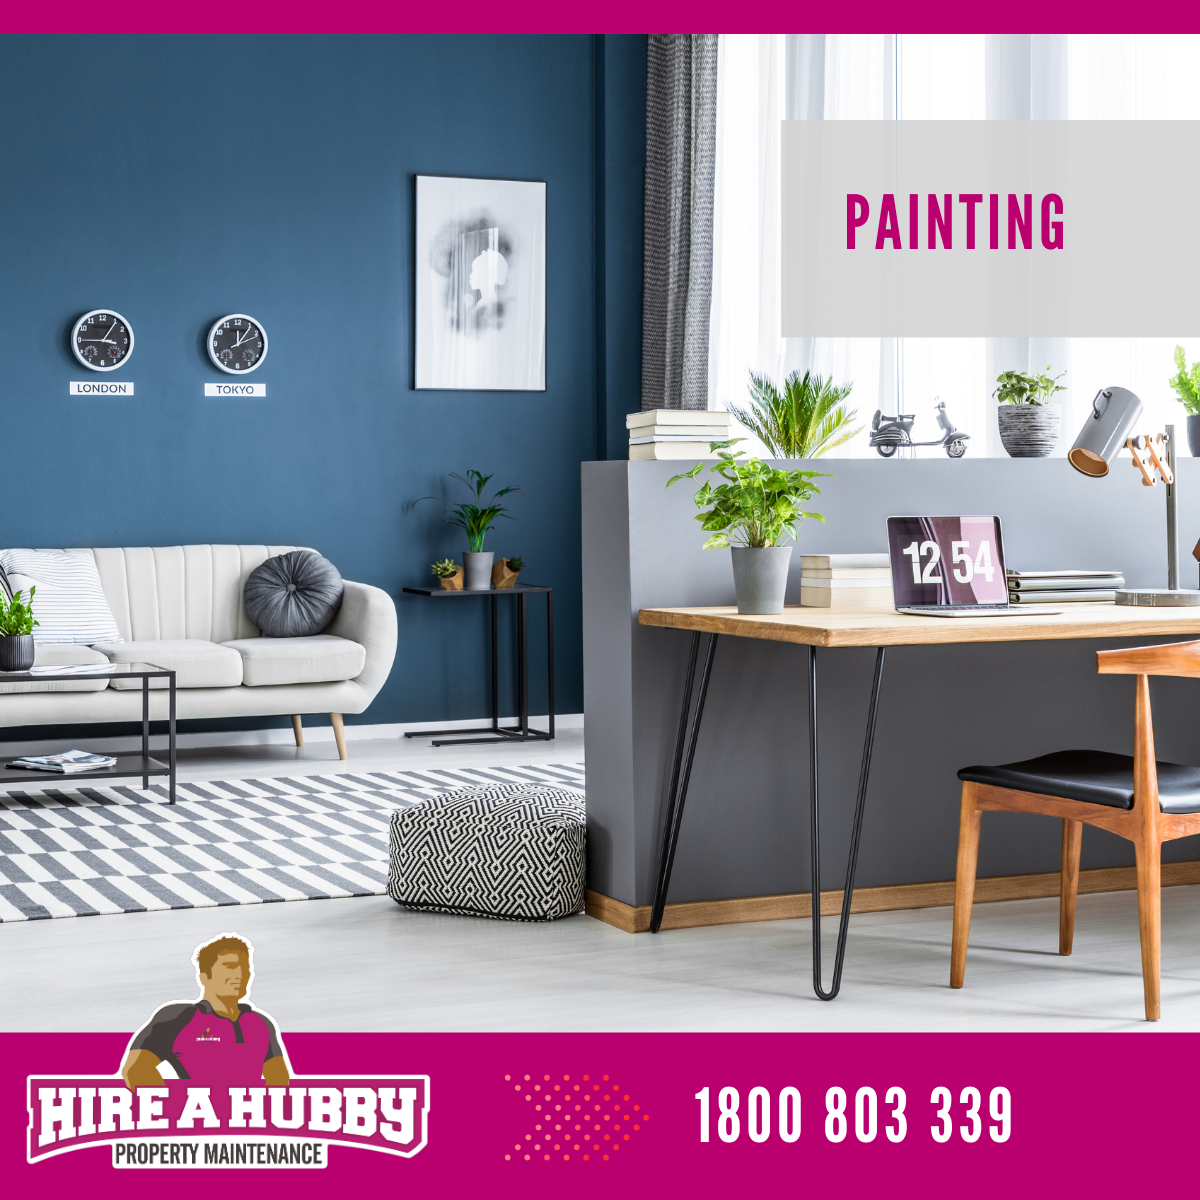 Refresh your home with a new coat of paint. Hire A Hubby Trinity Beach Brinsmead 1800 803 339